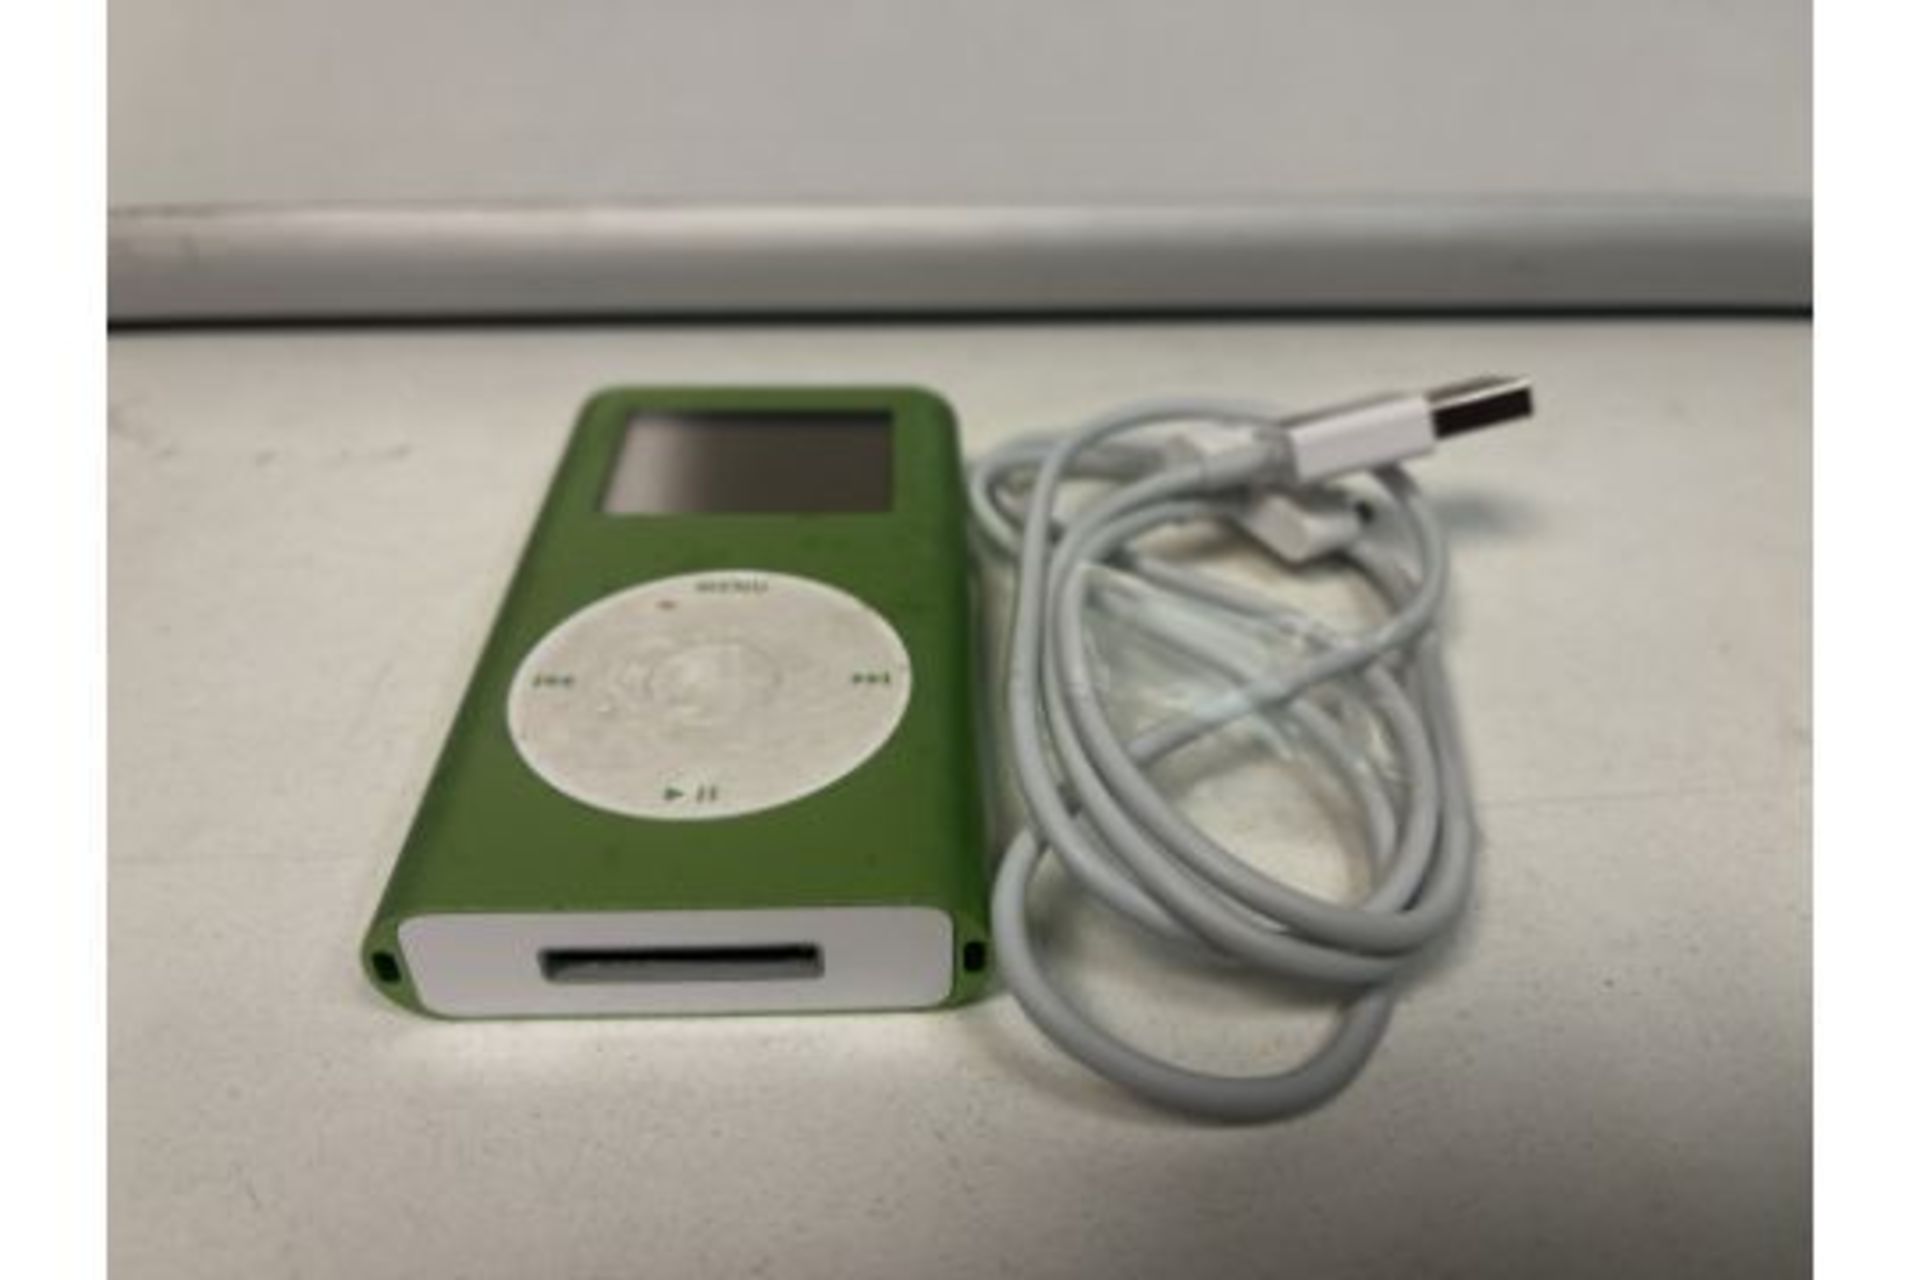 APPLE IPOD MINI, 6GB STORAGE WITH CHARGE CABLE (50) 188